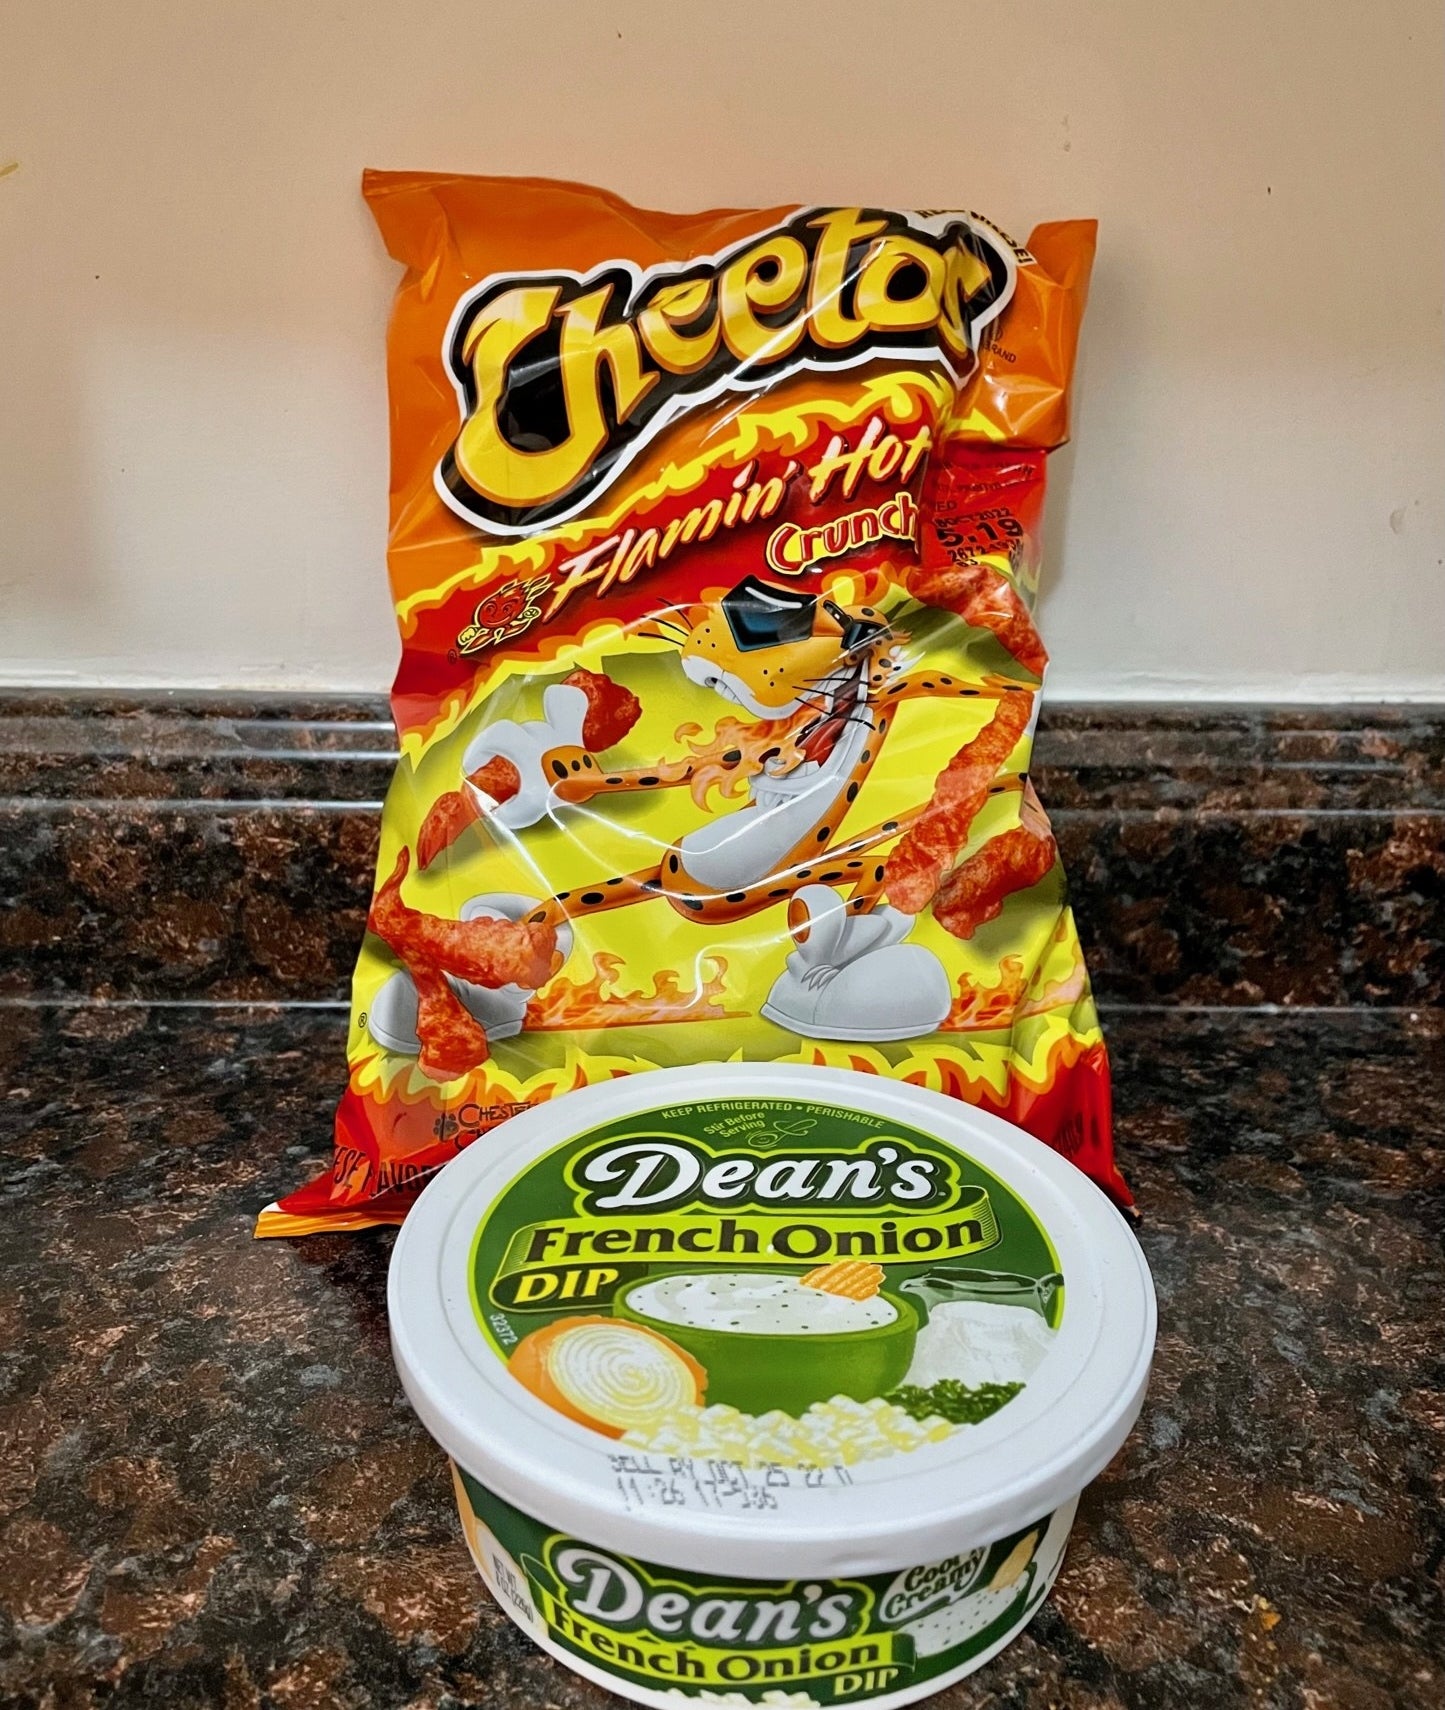 Hot Cheetos and French onion dip